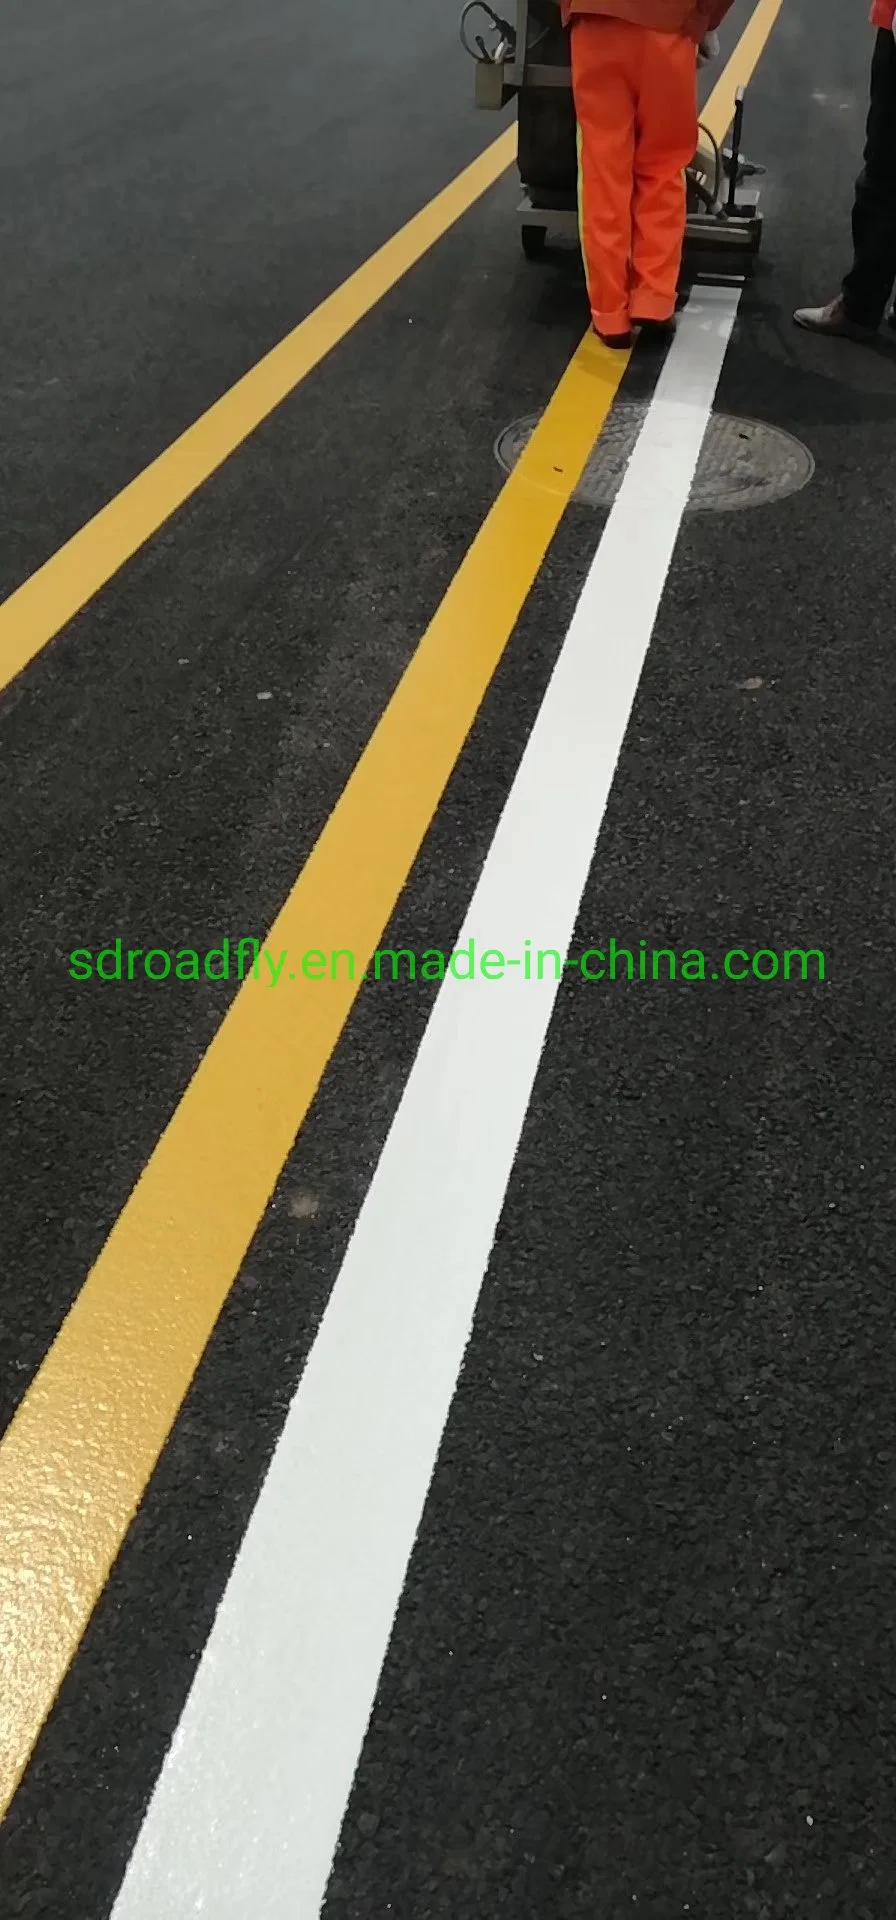 Good Price Thermoplastic Road Marking Material, Traffic Pavement Line Paint